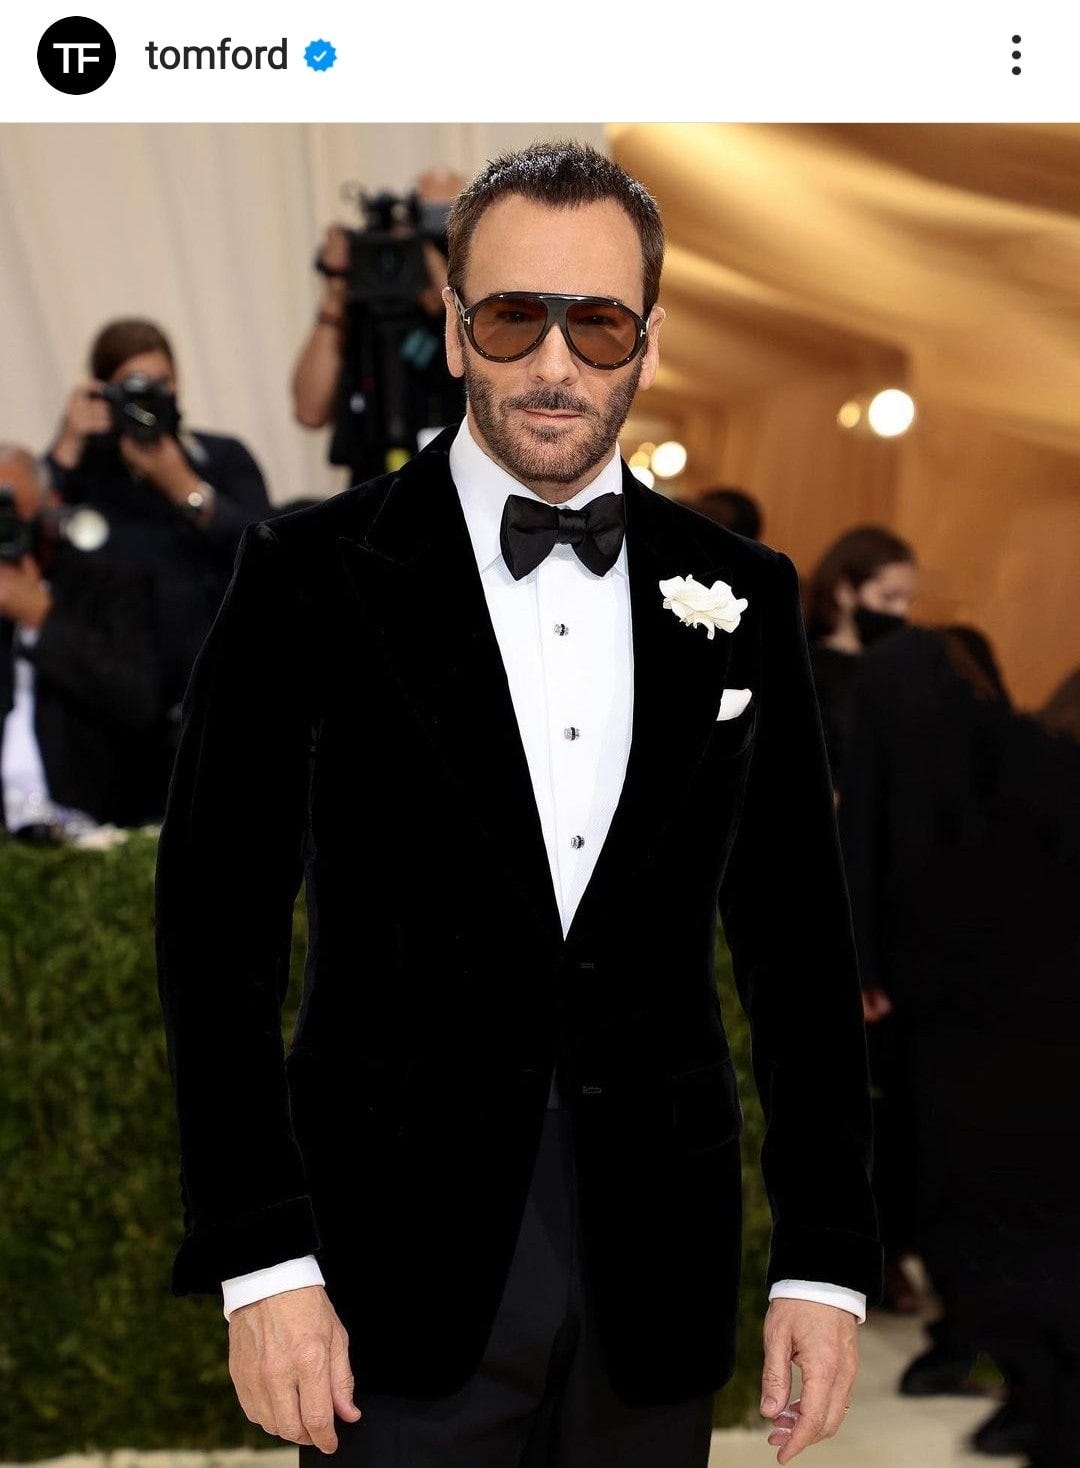 5 Lessons In Confidence And Style From Tom Ford's MET Gala Look, by James  Michael Sama